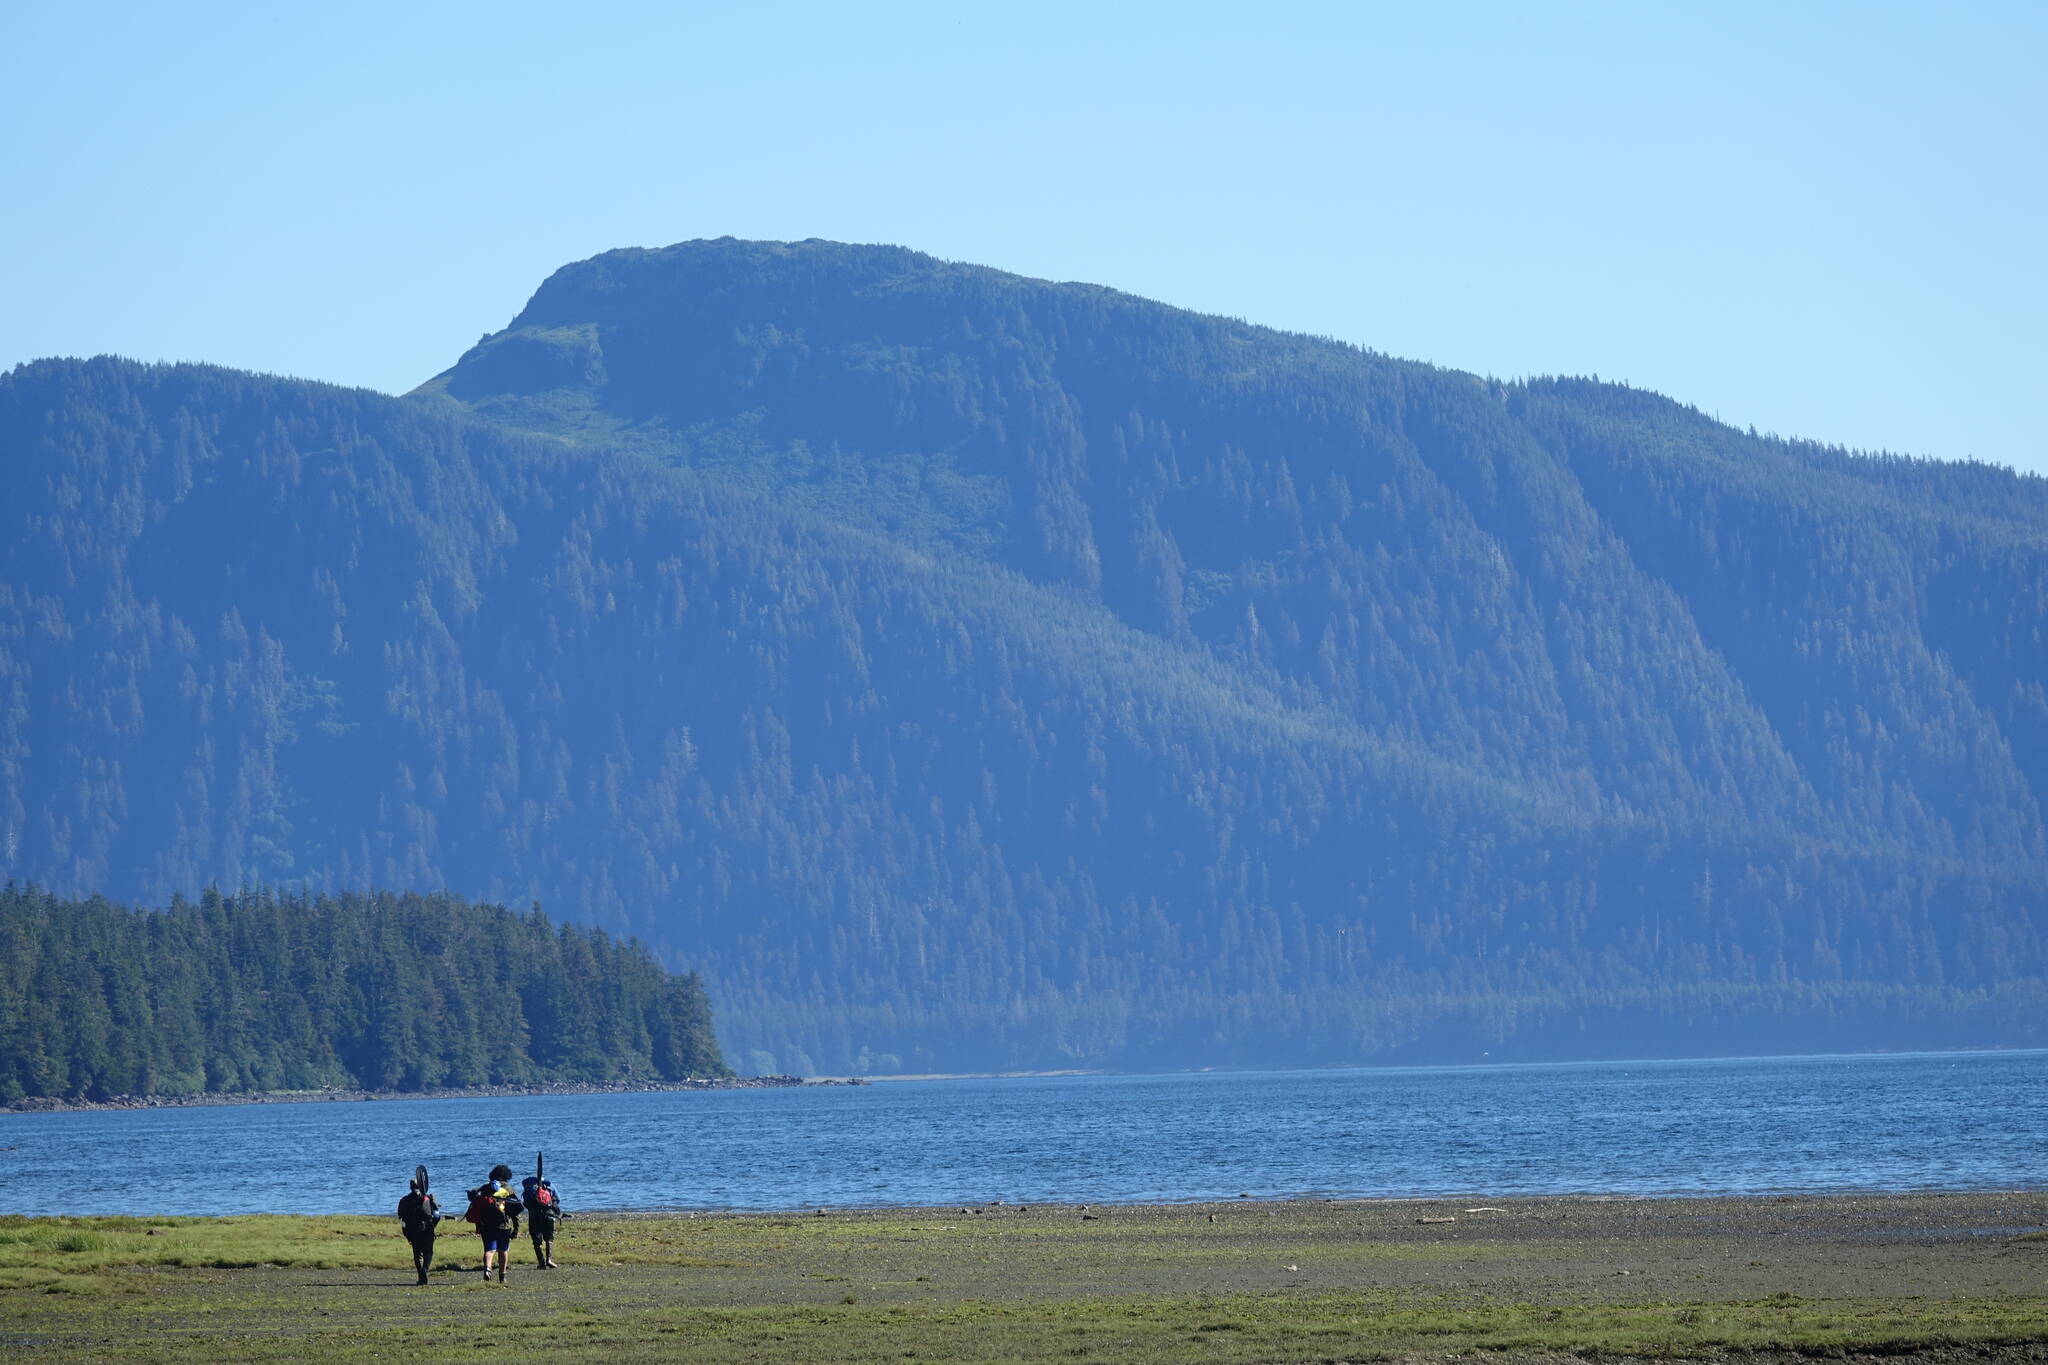 Trevor Fredrickson, Sam Fredrickson and Beebuks Kookesh hike down to the shore on the way to be picked up by a floatplane that would return them home, to Angoon. (Courtesy Photo / Mary Catharine Martin)